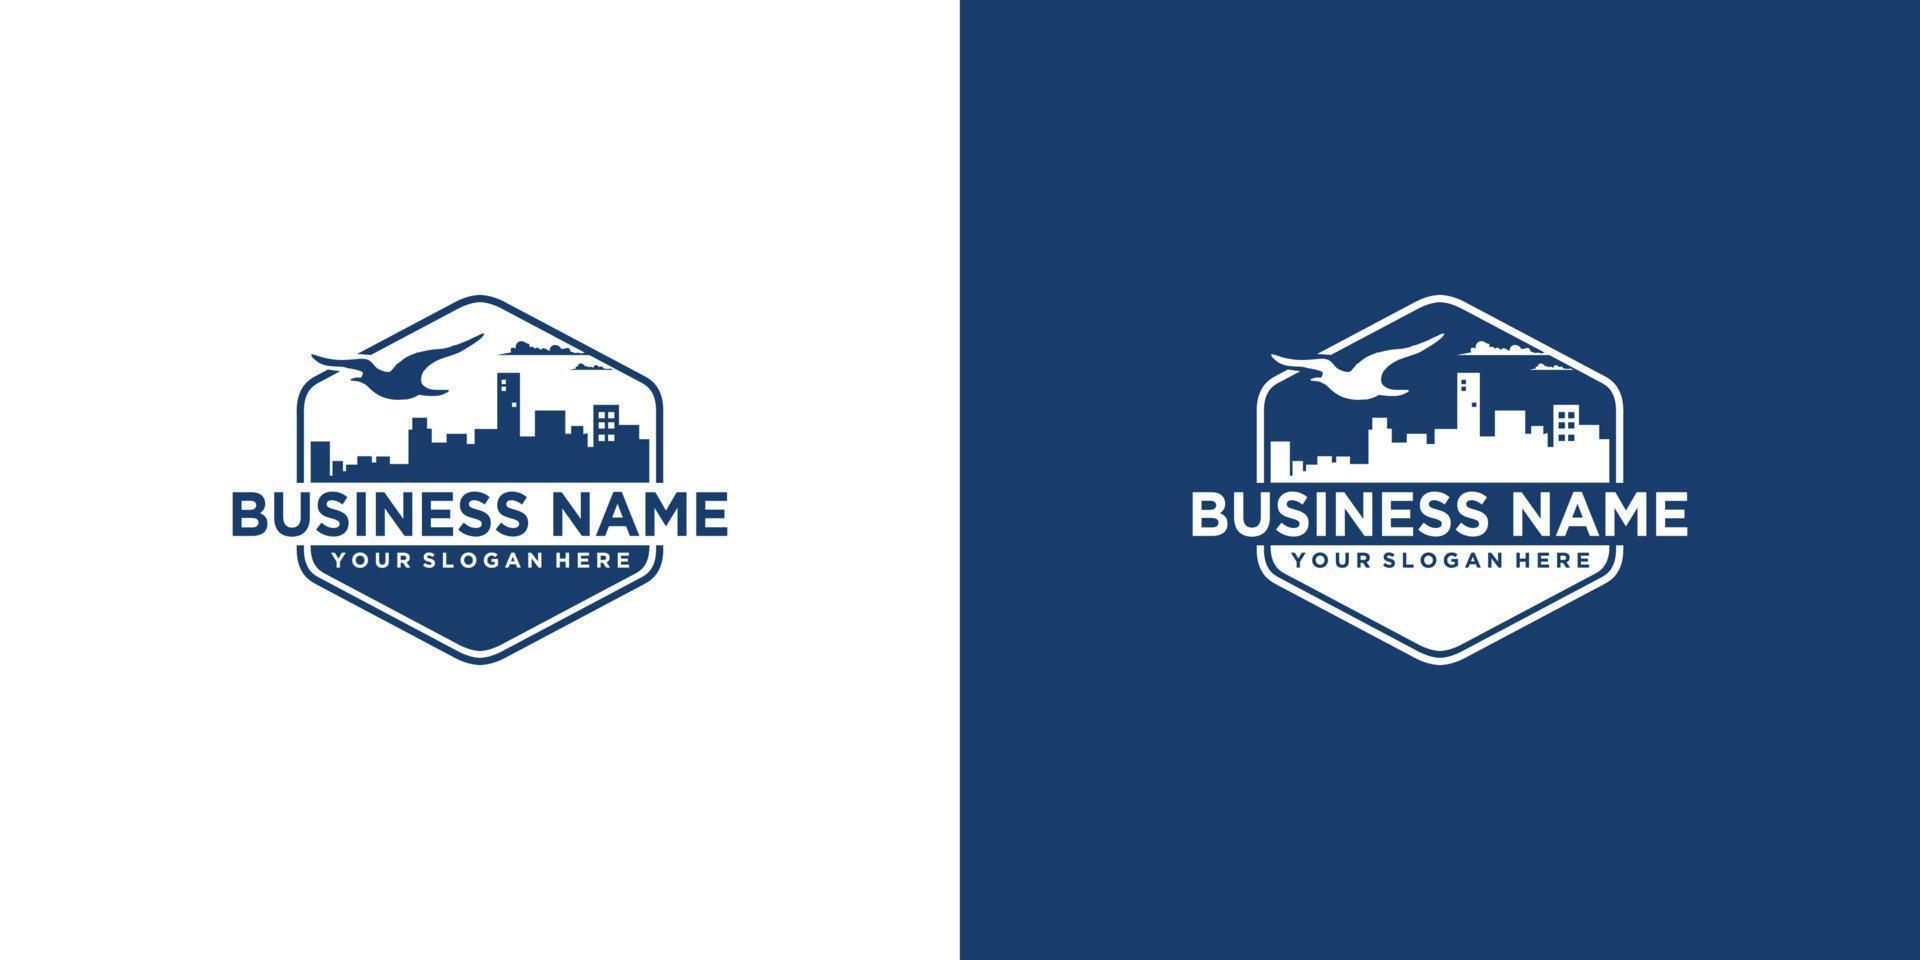 Flying bird over the city Branding Identity Corporate vector logo design template Isolated